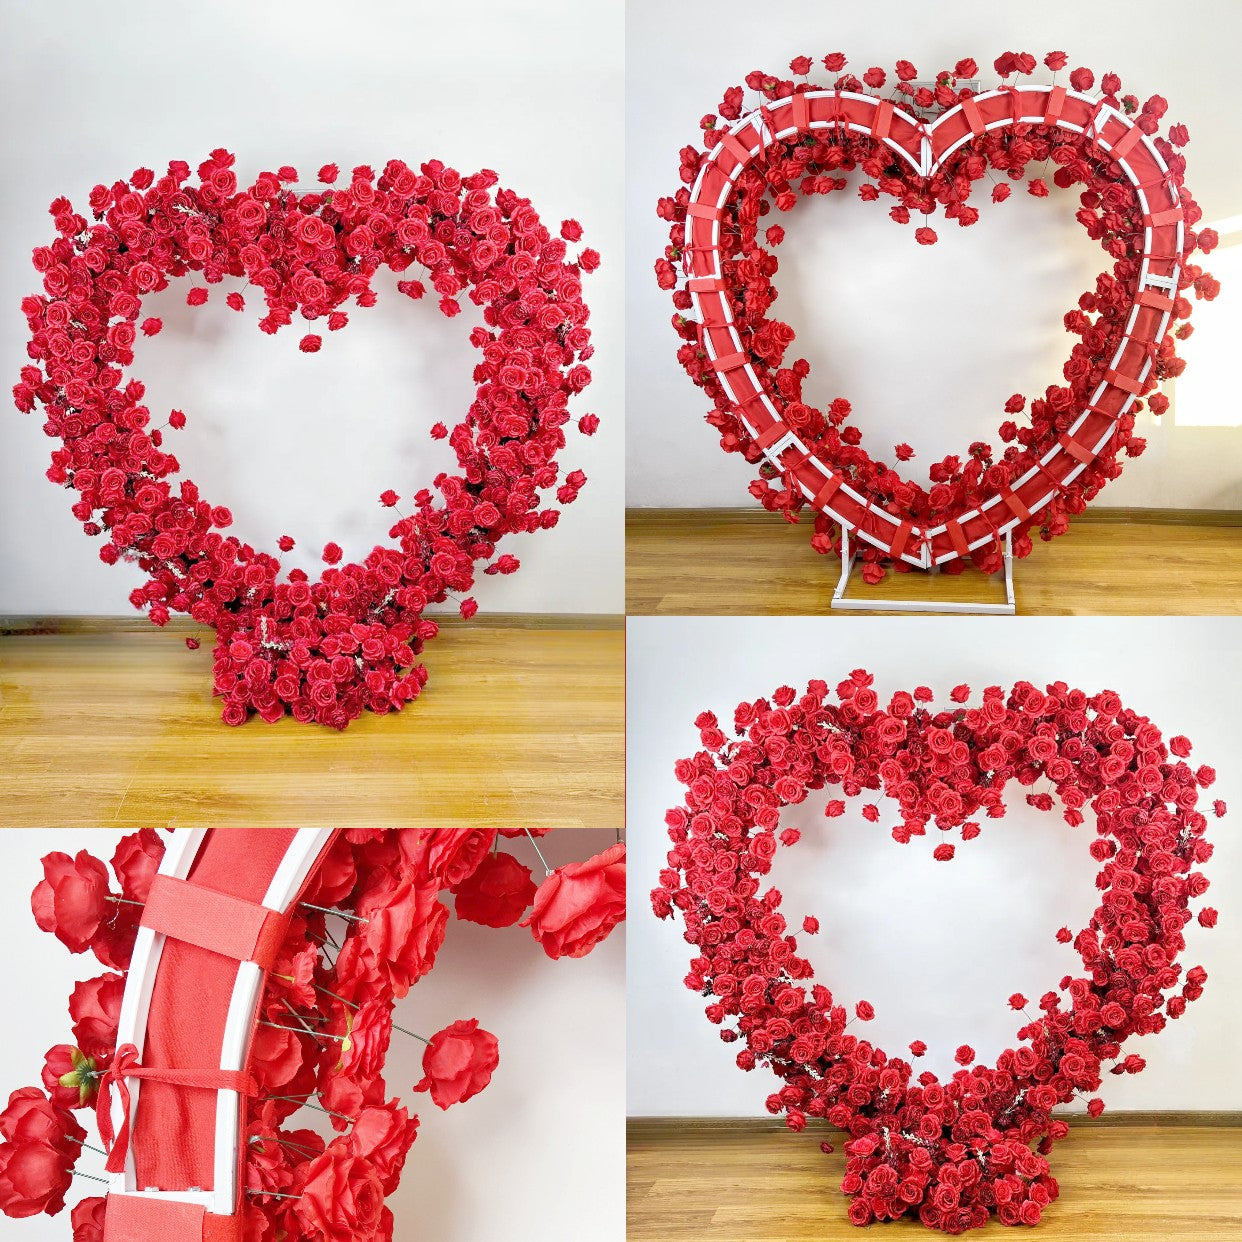 Flower Arch Heart Shaped Red Roses Floral Set Fabric Backdrop Proposal Wedding Party Decor - KetieStory